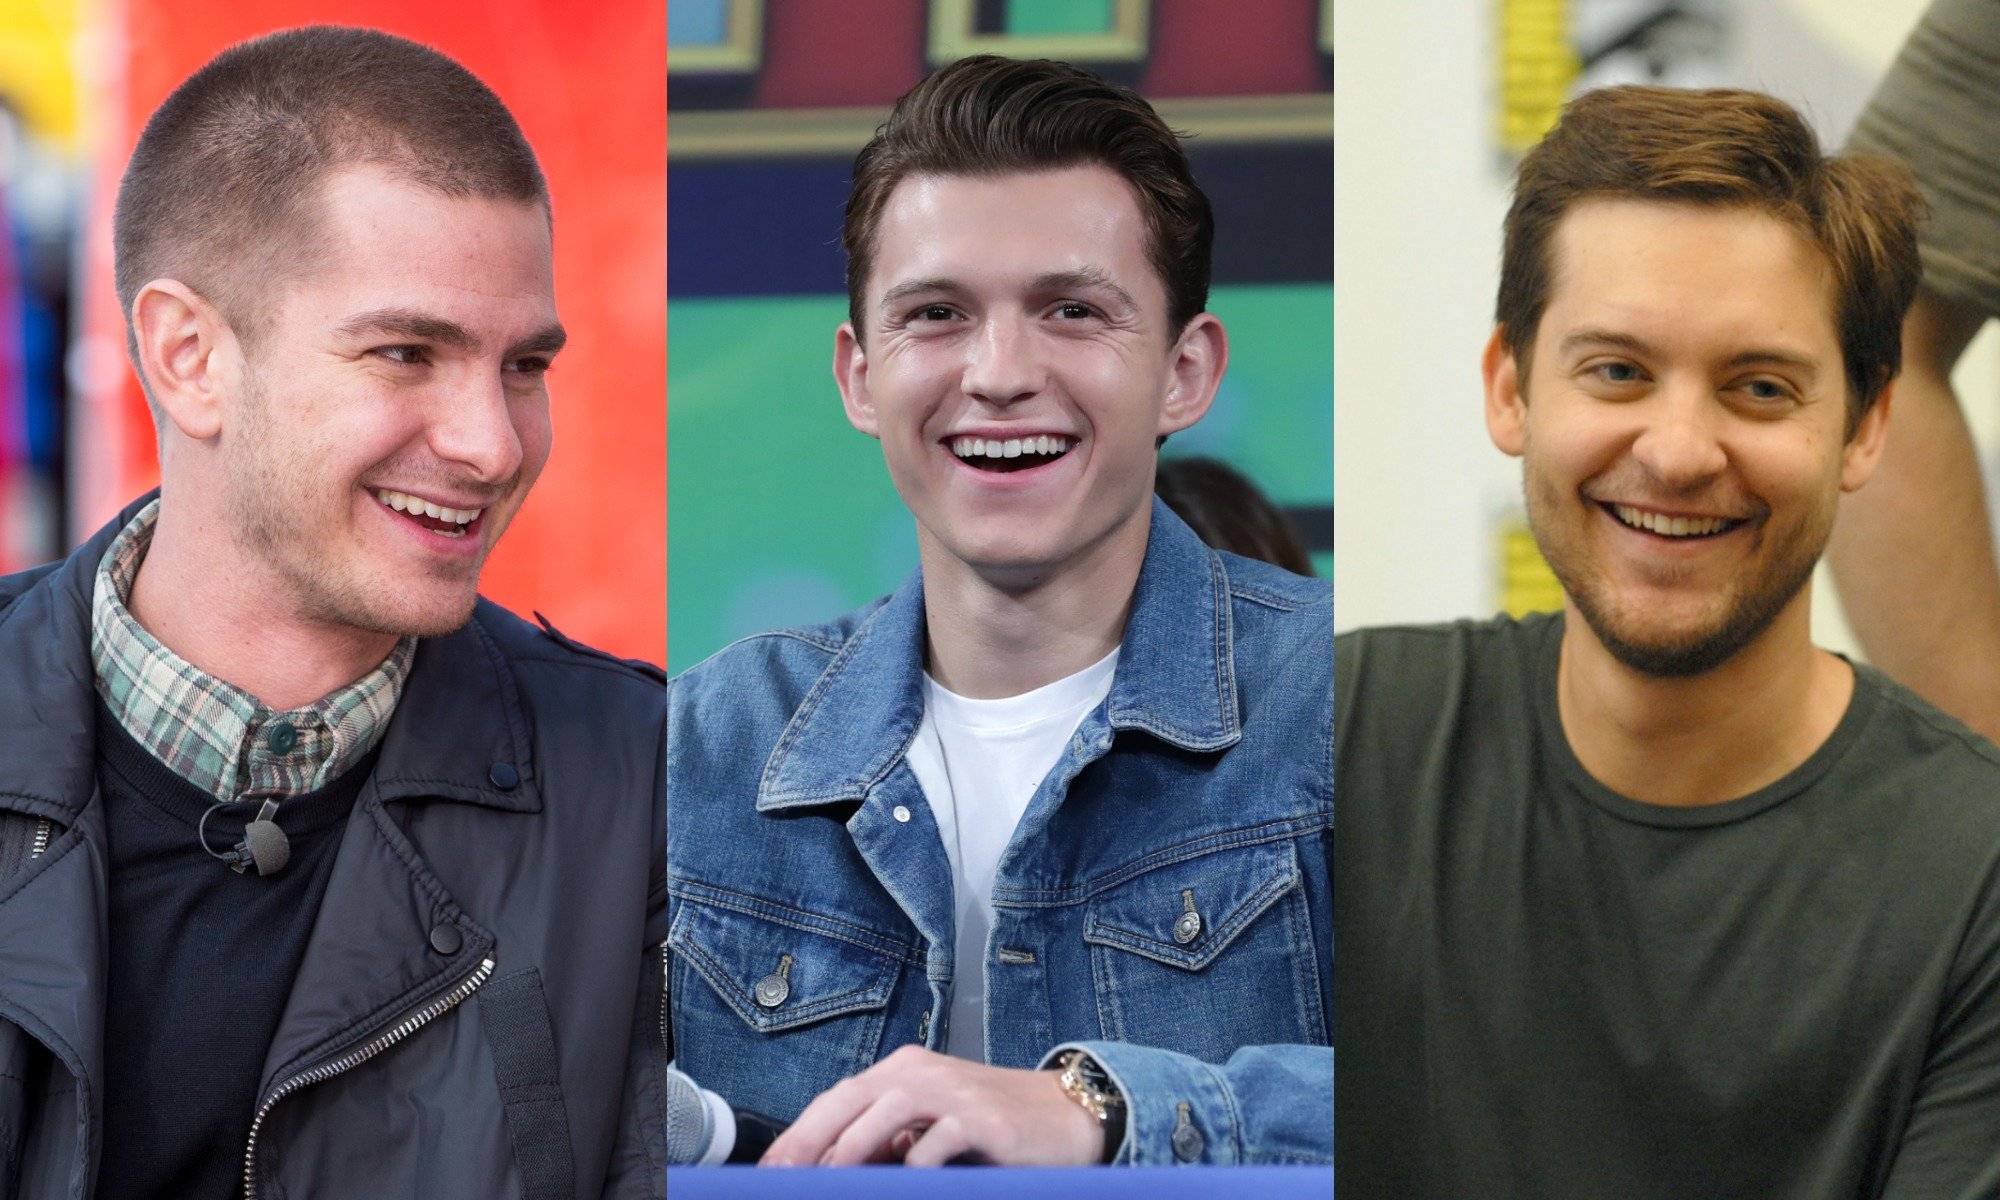 'Spider-Man' actors Andrew Garfield, Tom Holland, and Tobey Maguire. Three different photos show all three smiling and laughing.